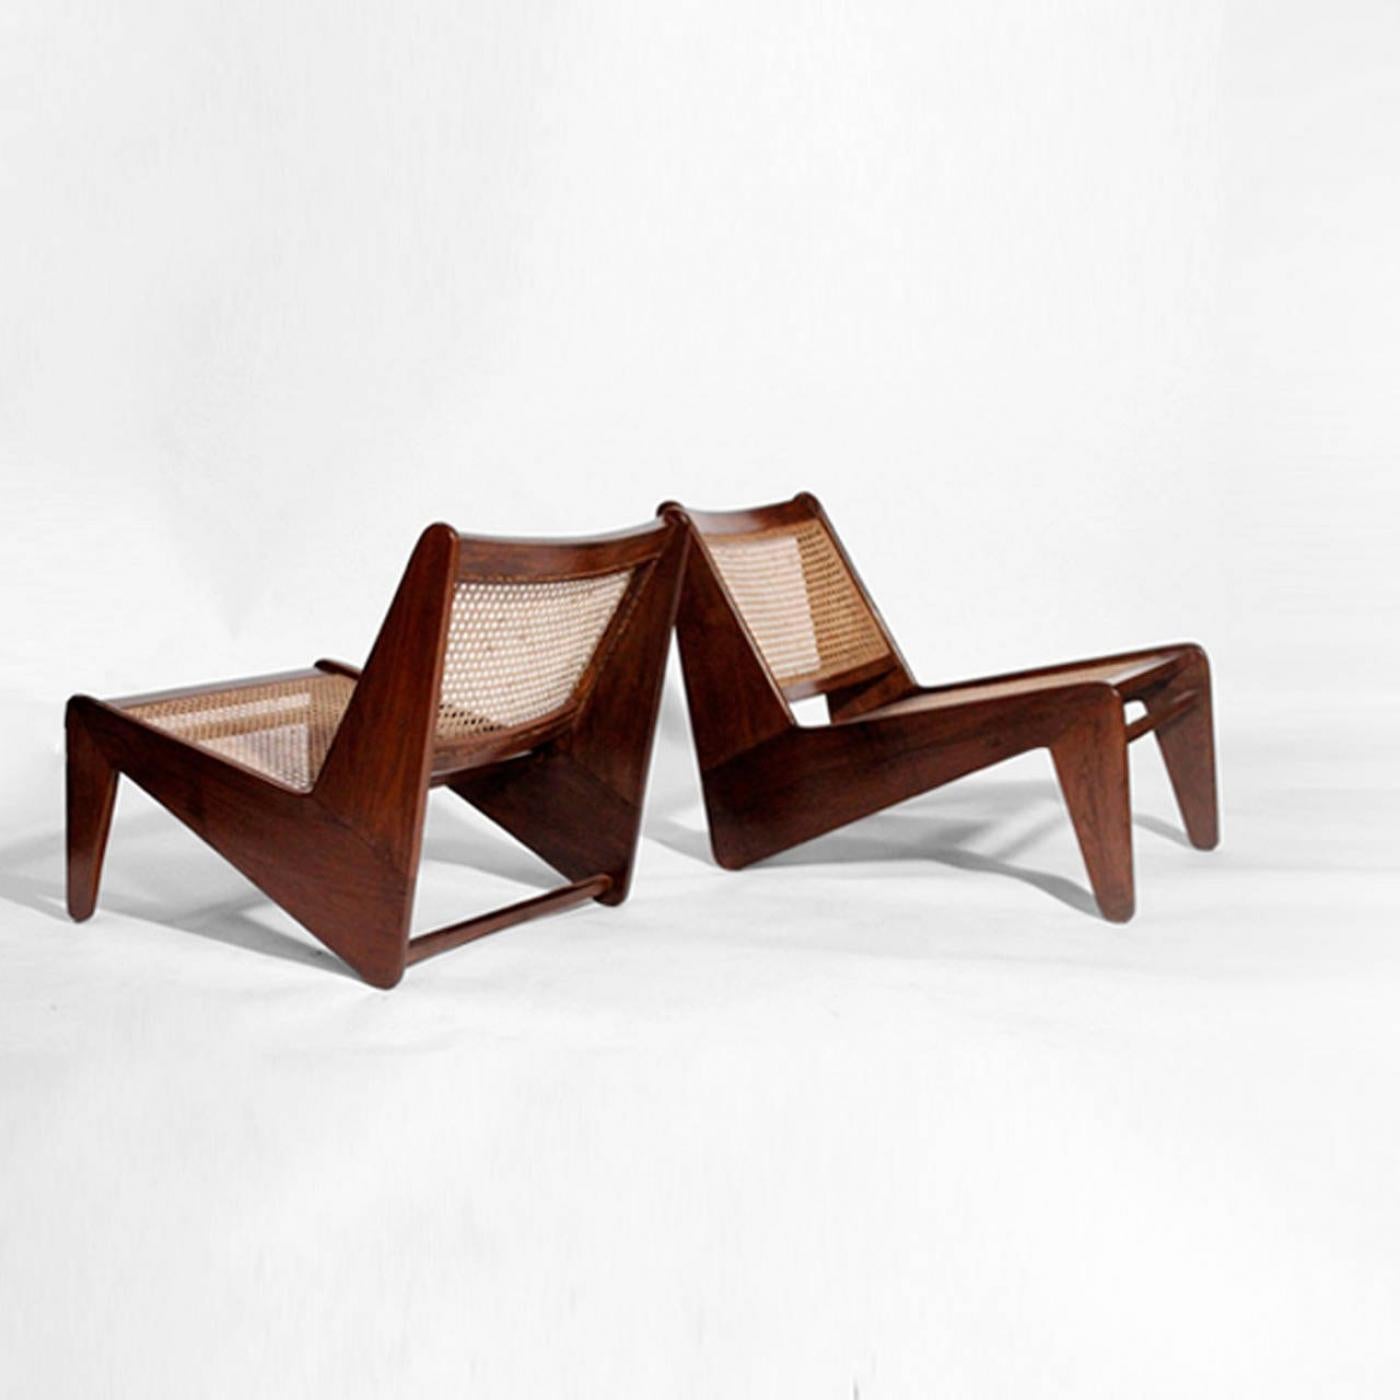 Indian Kangourou Lounge Chair in the Style of Jeanneret, Chandigarh, India For Sale